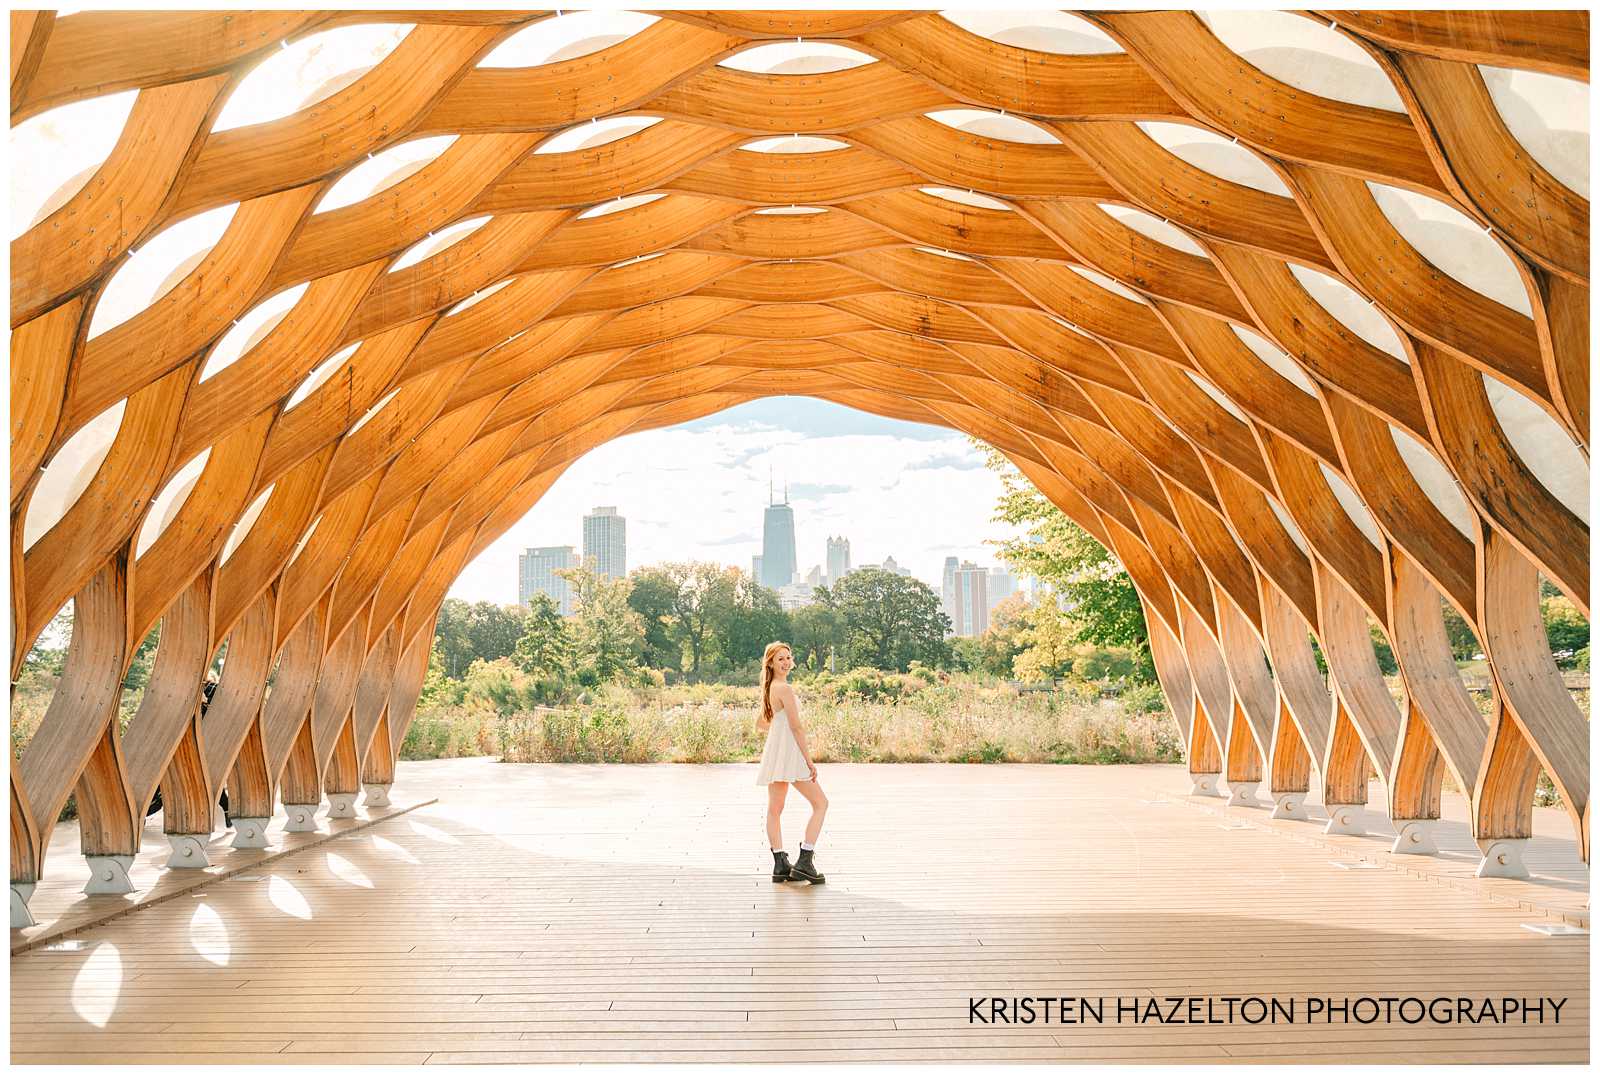 High School Senior photos at the Lincoln Park zoo Honeycomb or People's Gas Pavilion by Chicago Senior Photographer Kristen Hazelton